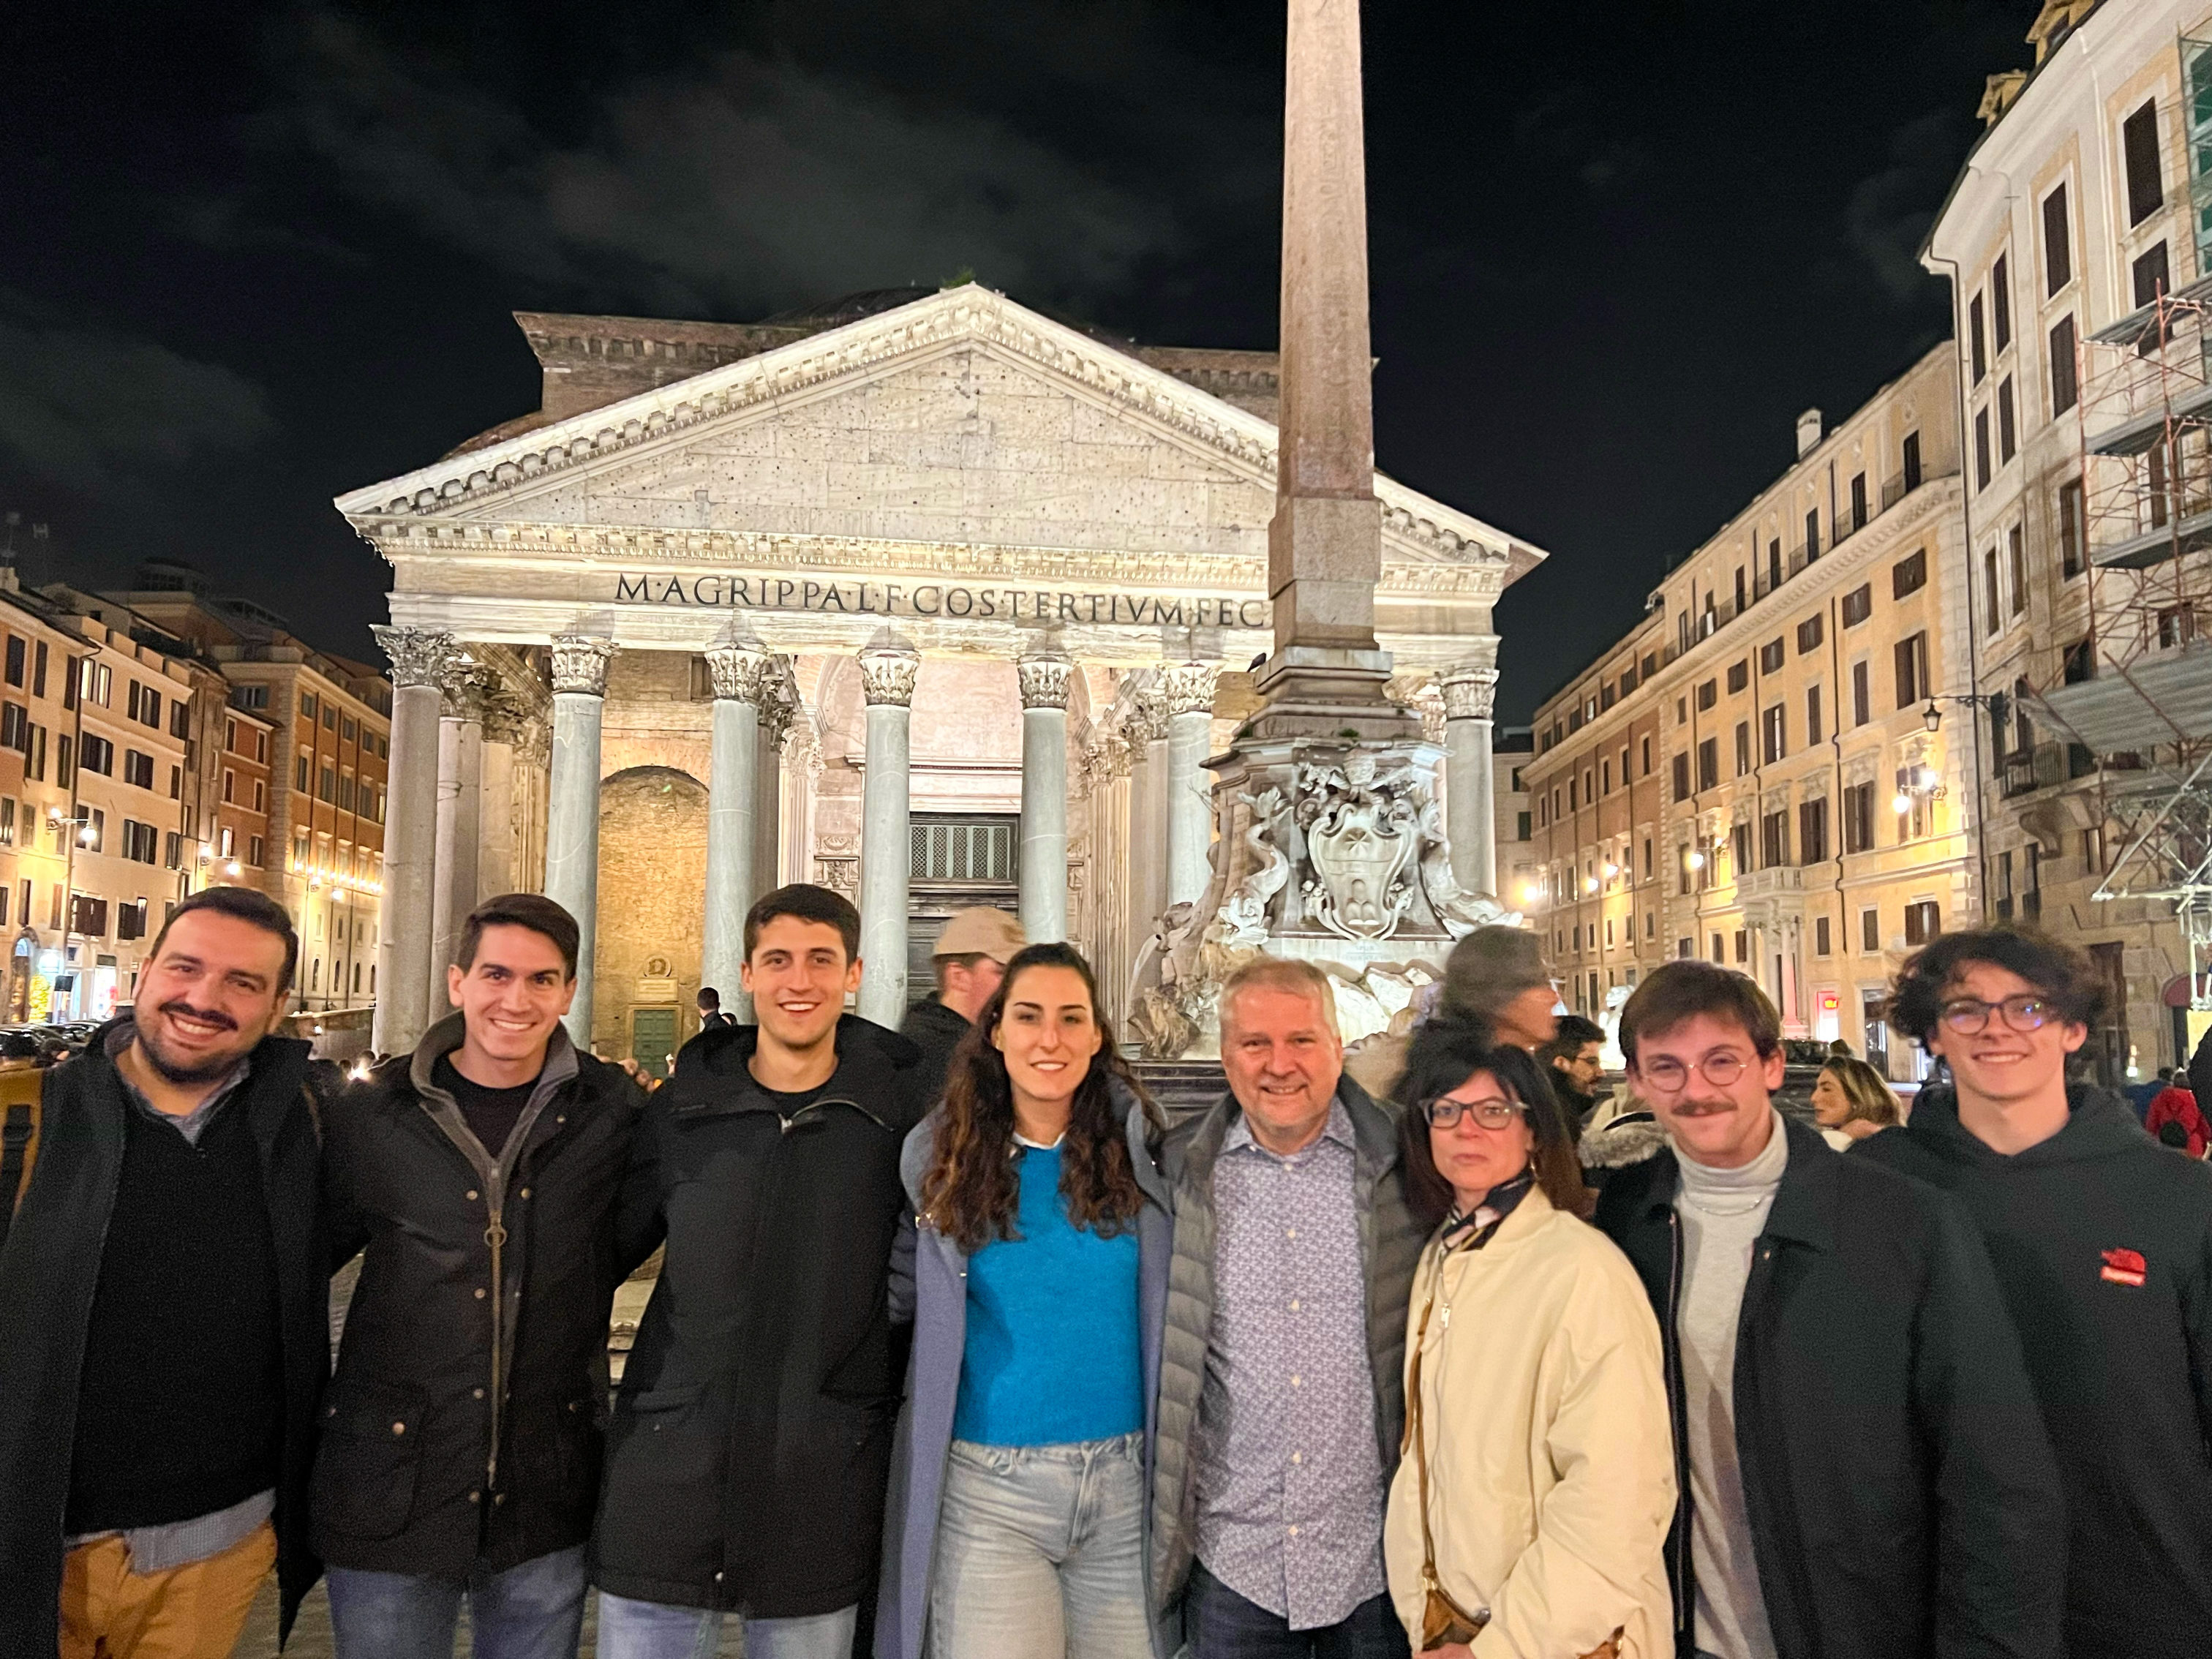 AMA and the Teeter family visits 2hire in Rome, Italy